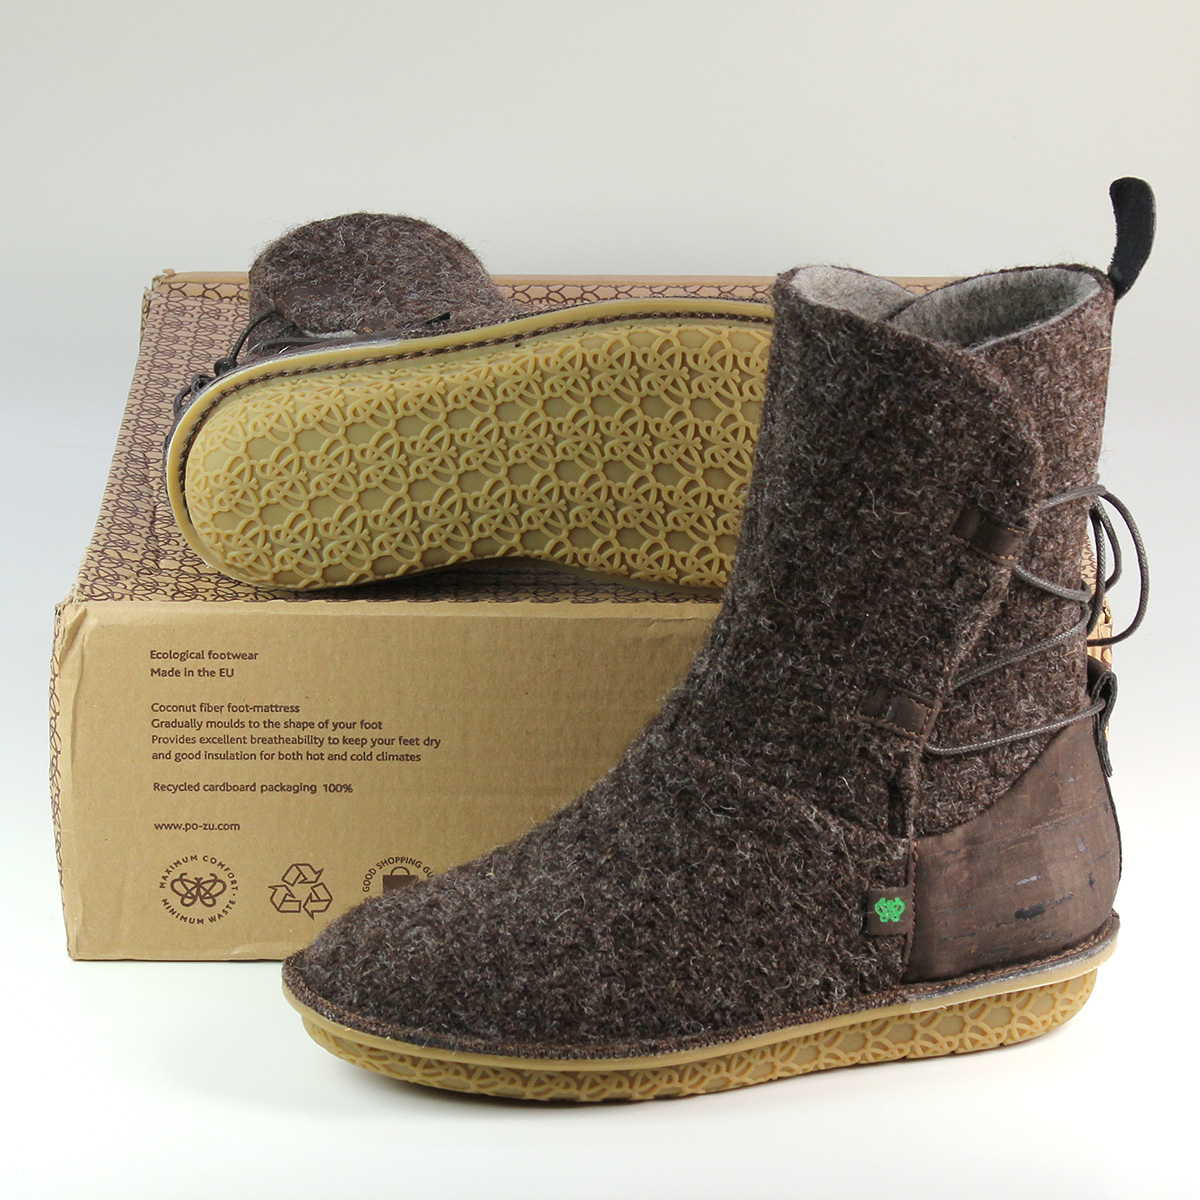 Sustainable Shoes & Eco Ethical Footwear from Po-Zu